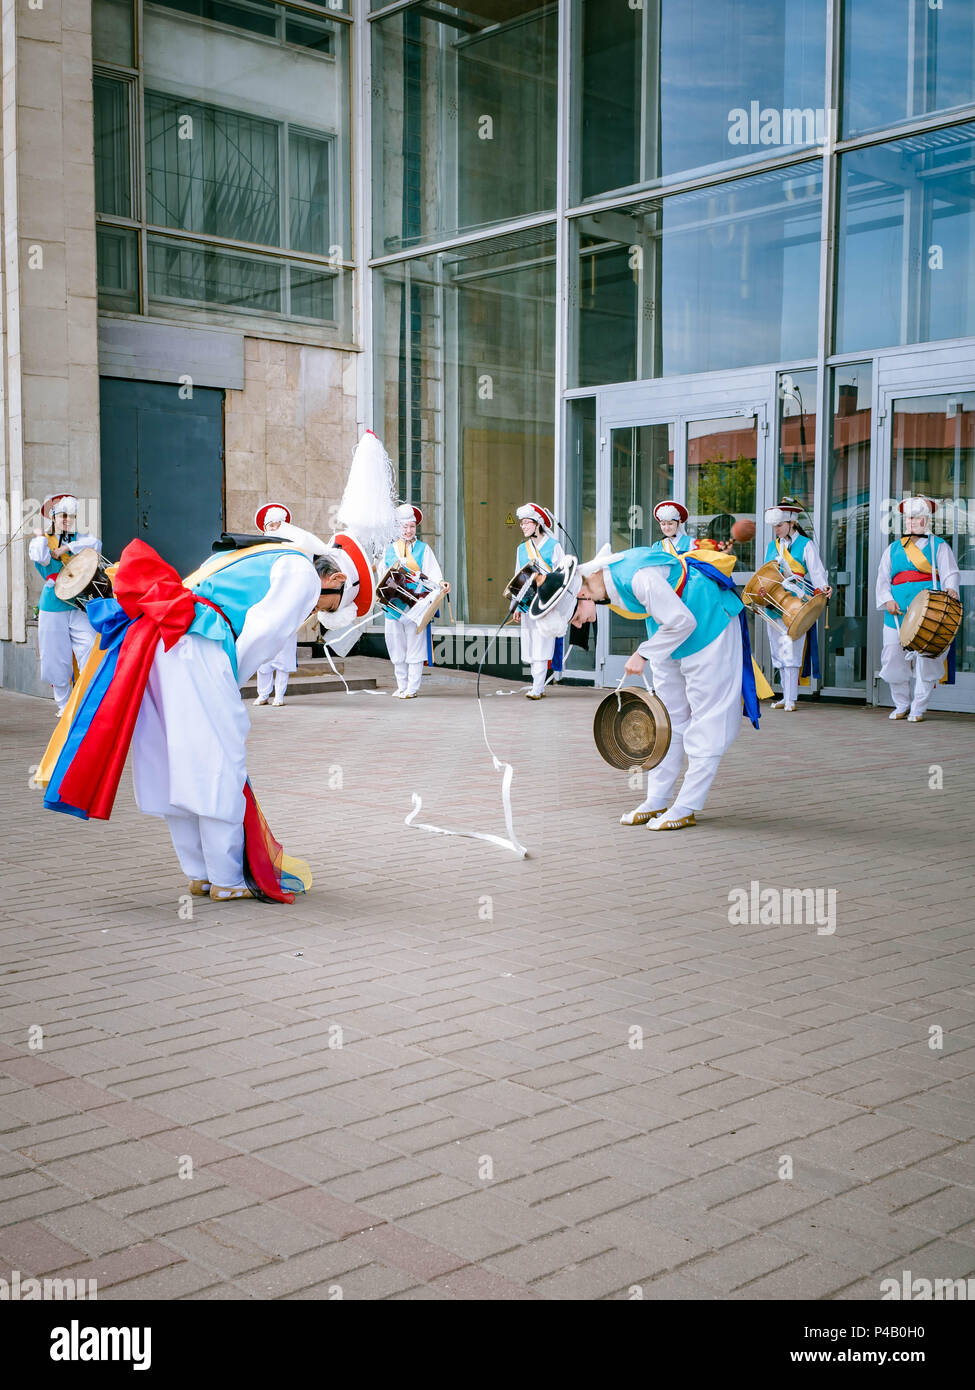 Moscow, Russia, July 12, 2018: Korean traditional percussion musical instruments. A group of musicians and dancers in bright colored suits perform tra Stock Photo